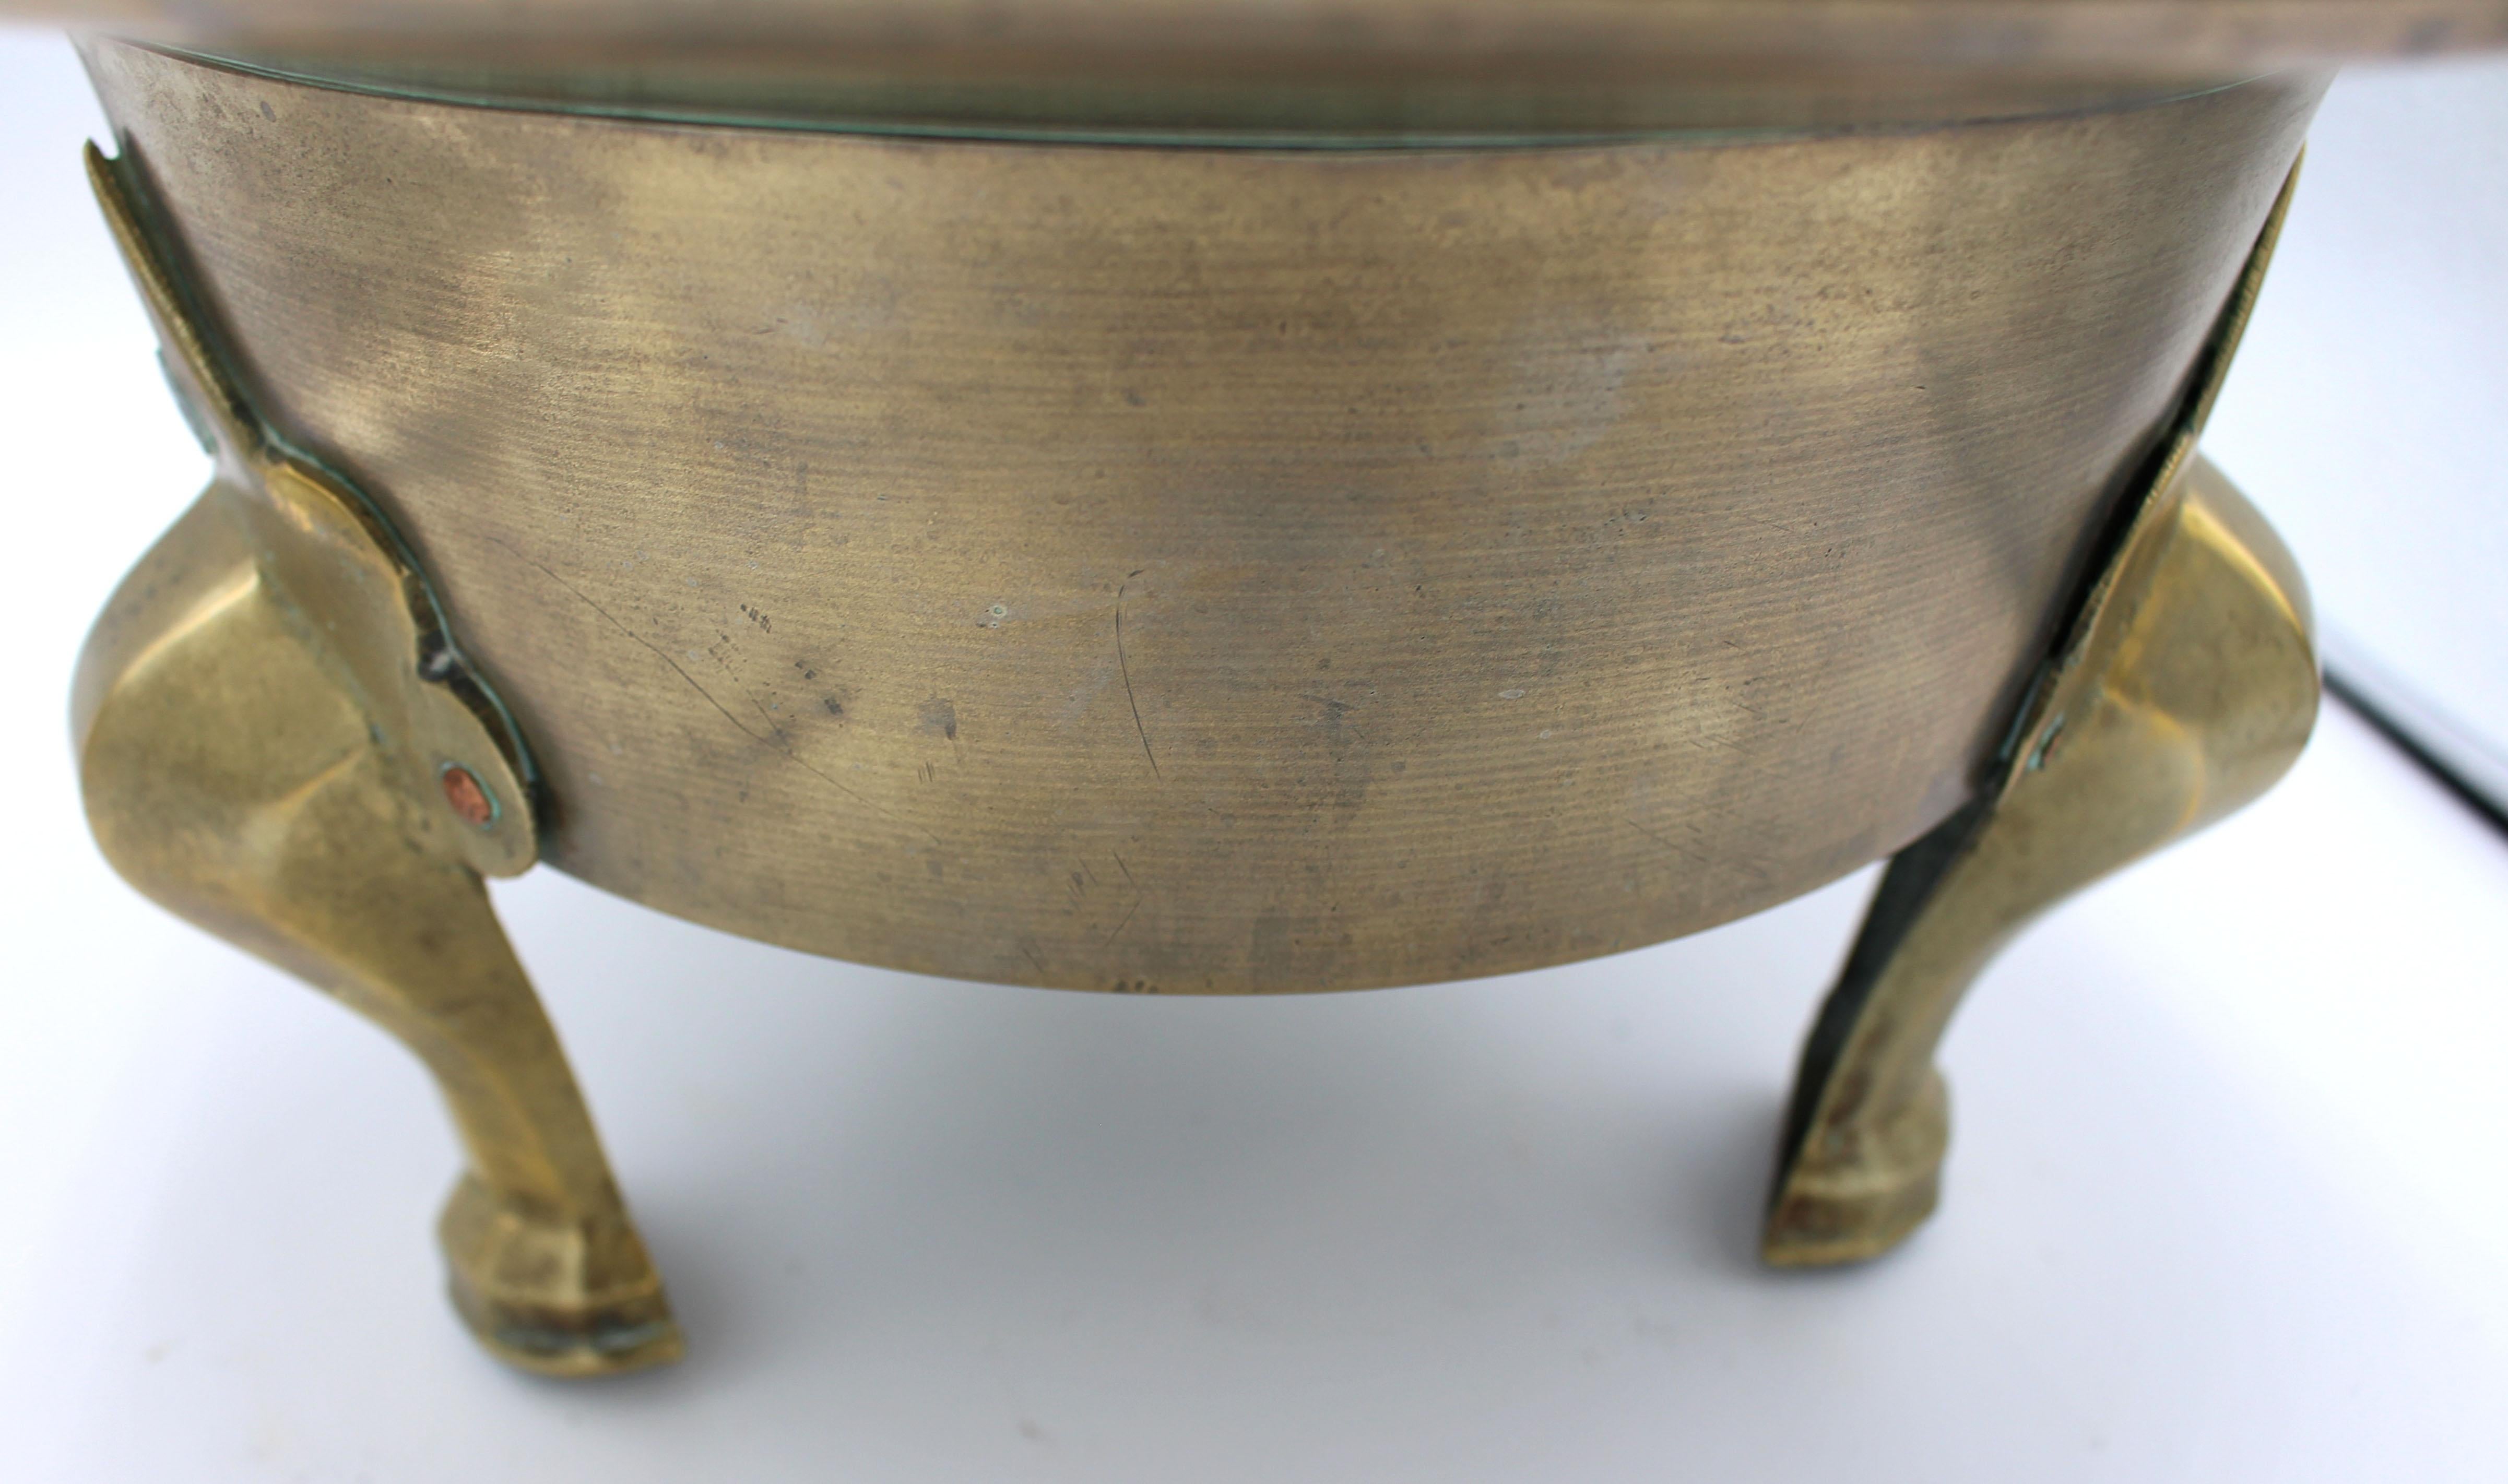 Later 19th century Korean brazier (Hibachi), brass on three legs. Heavy spun brass. The cartouche & cabriole molded shaped legs applied to the body with mostly copper rivets. Asian character marks on bottom, illegible.
14 3/8